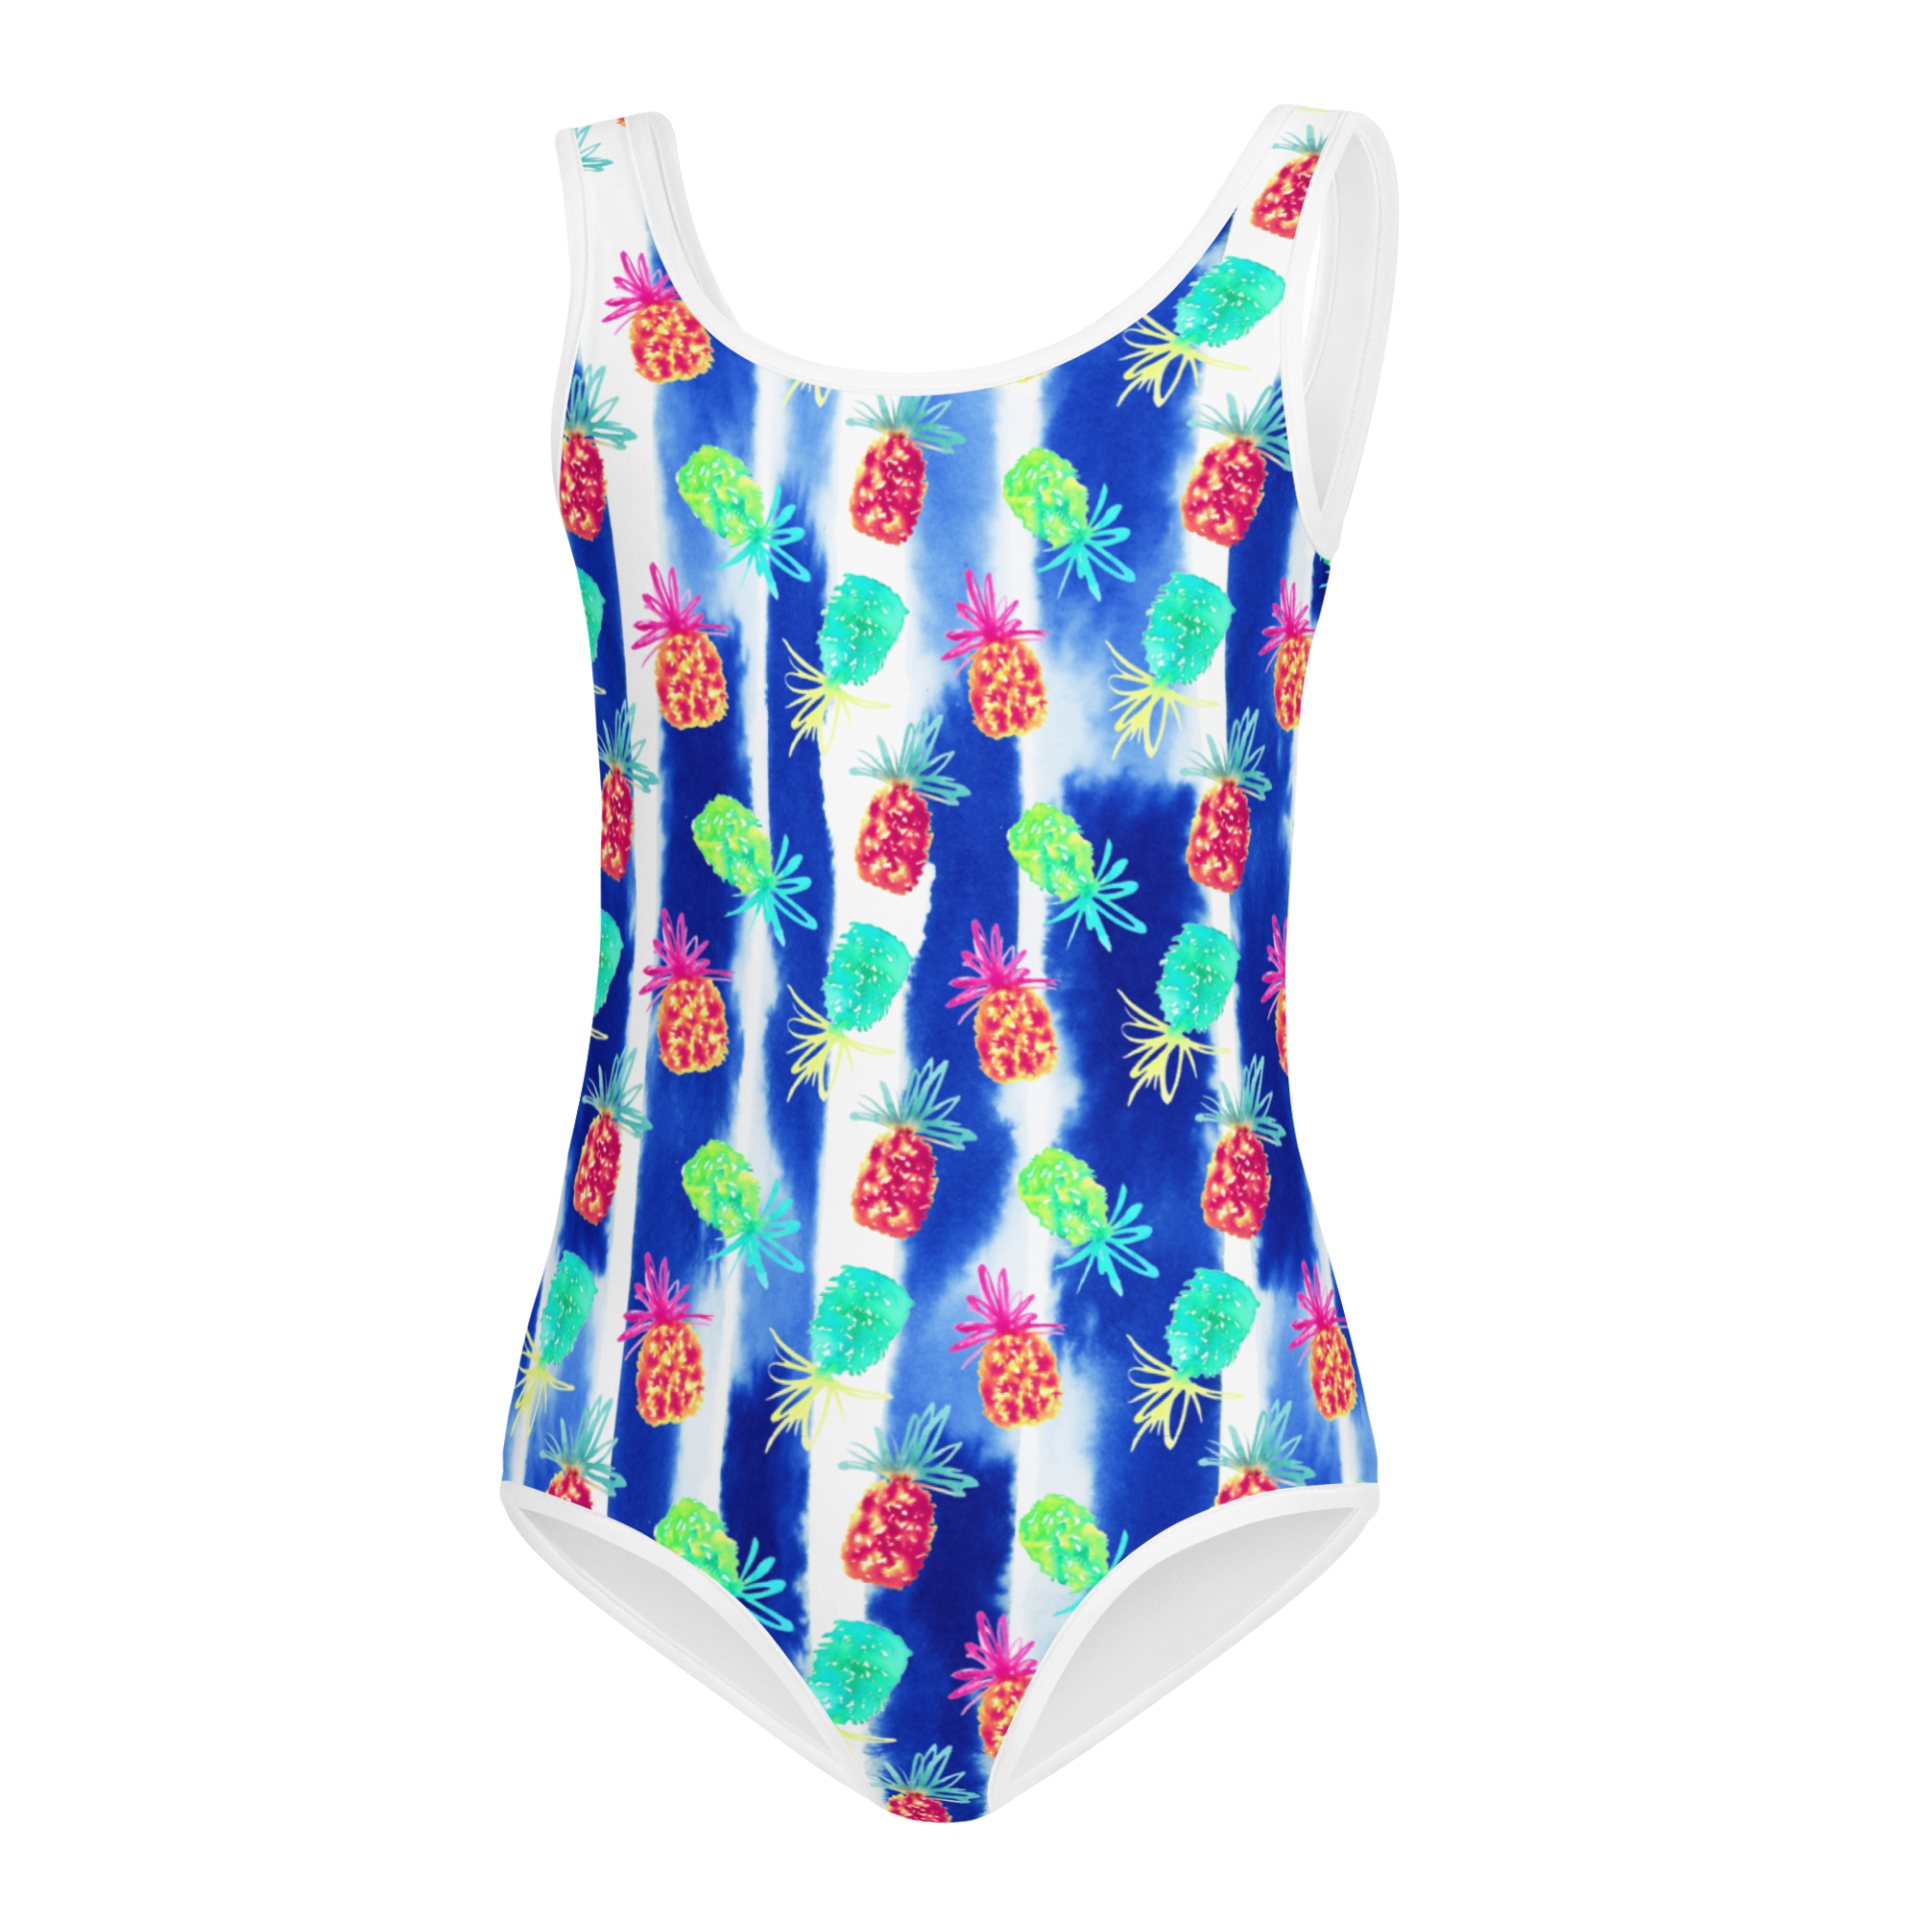 all-over-print-kids-swimsuit-white-front-6280a217103c3